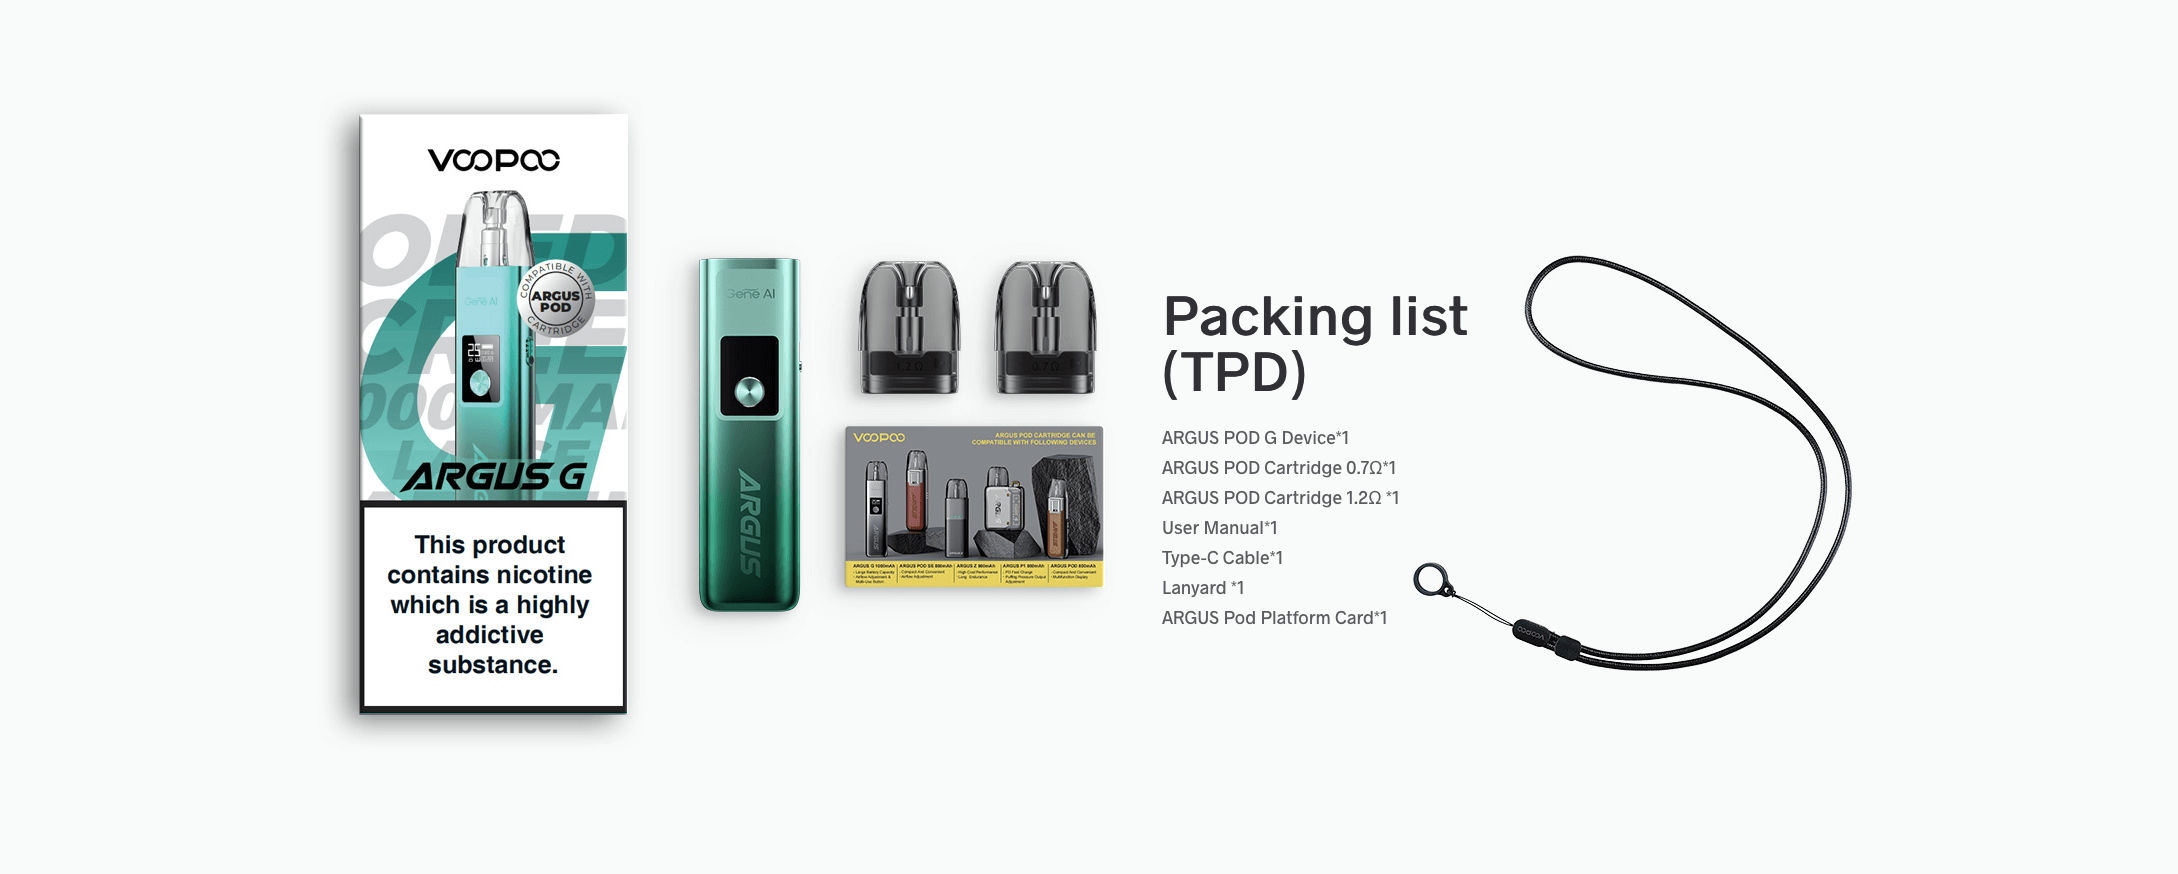 Voopoo Argus G Pod Kit | What's in the box? / Packing list (TPD)